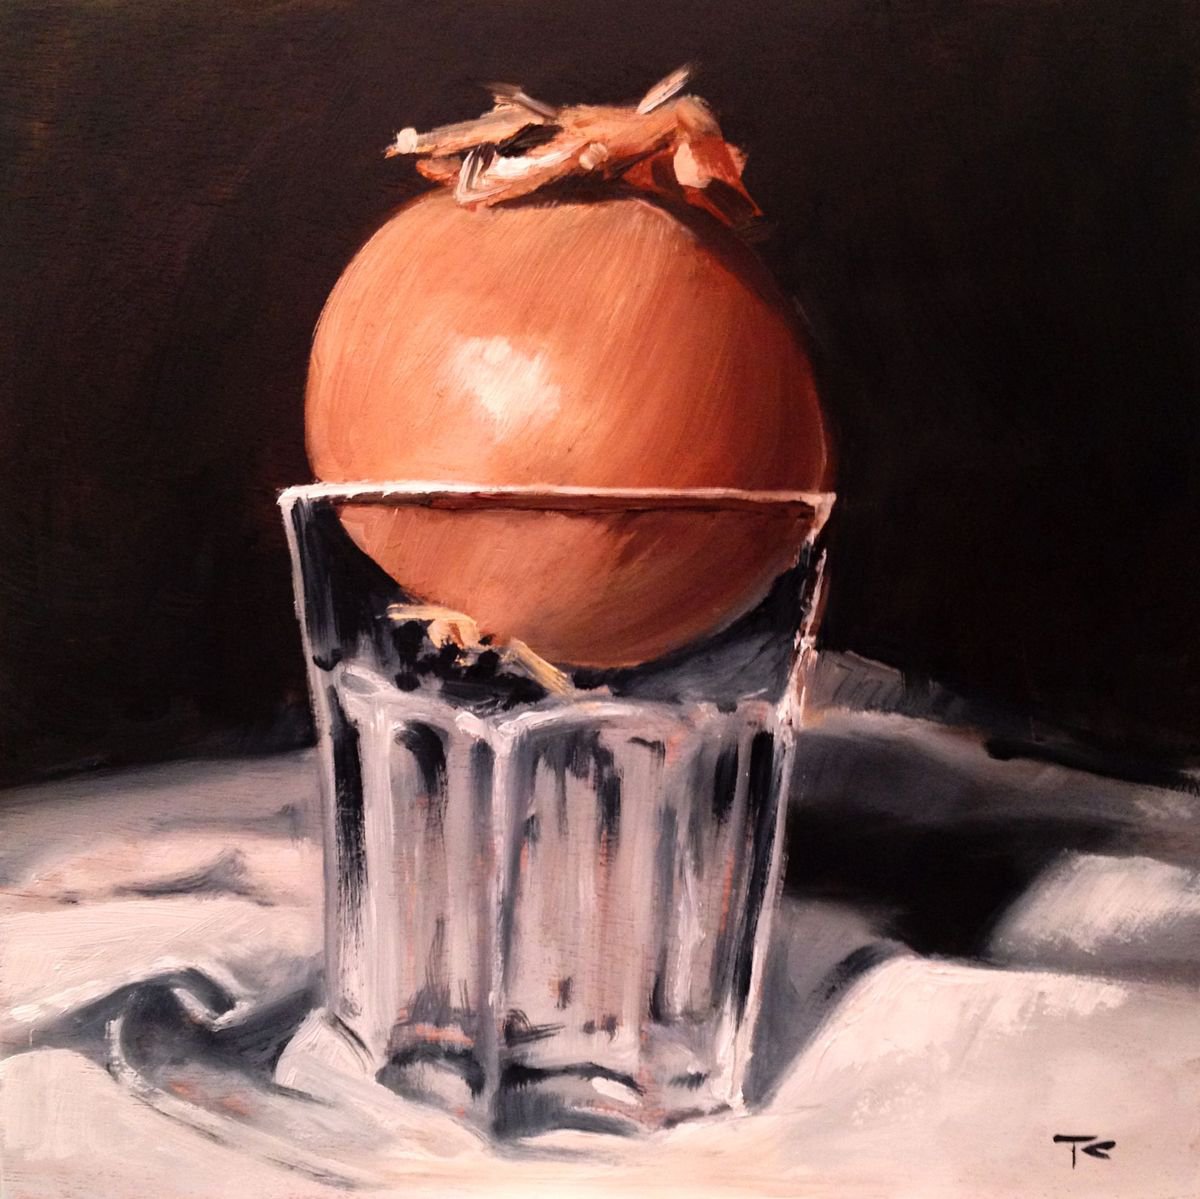 Onion in a glass - original oil painting- 20 x 20 cm (8’ x 8’) by Carlo Toma